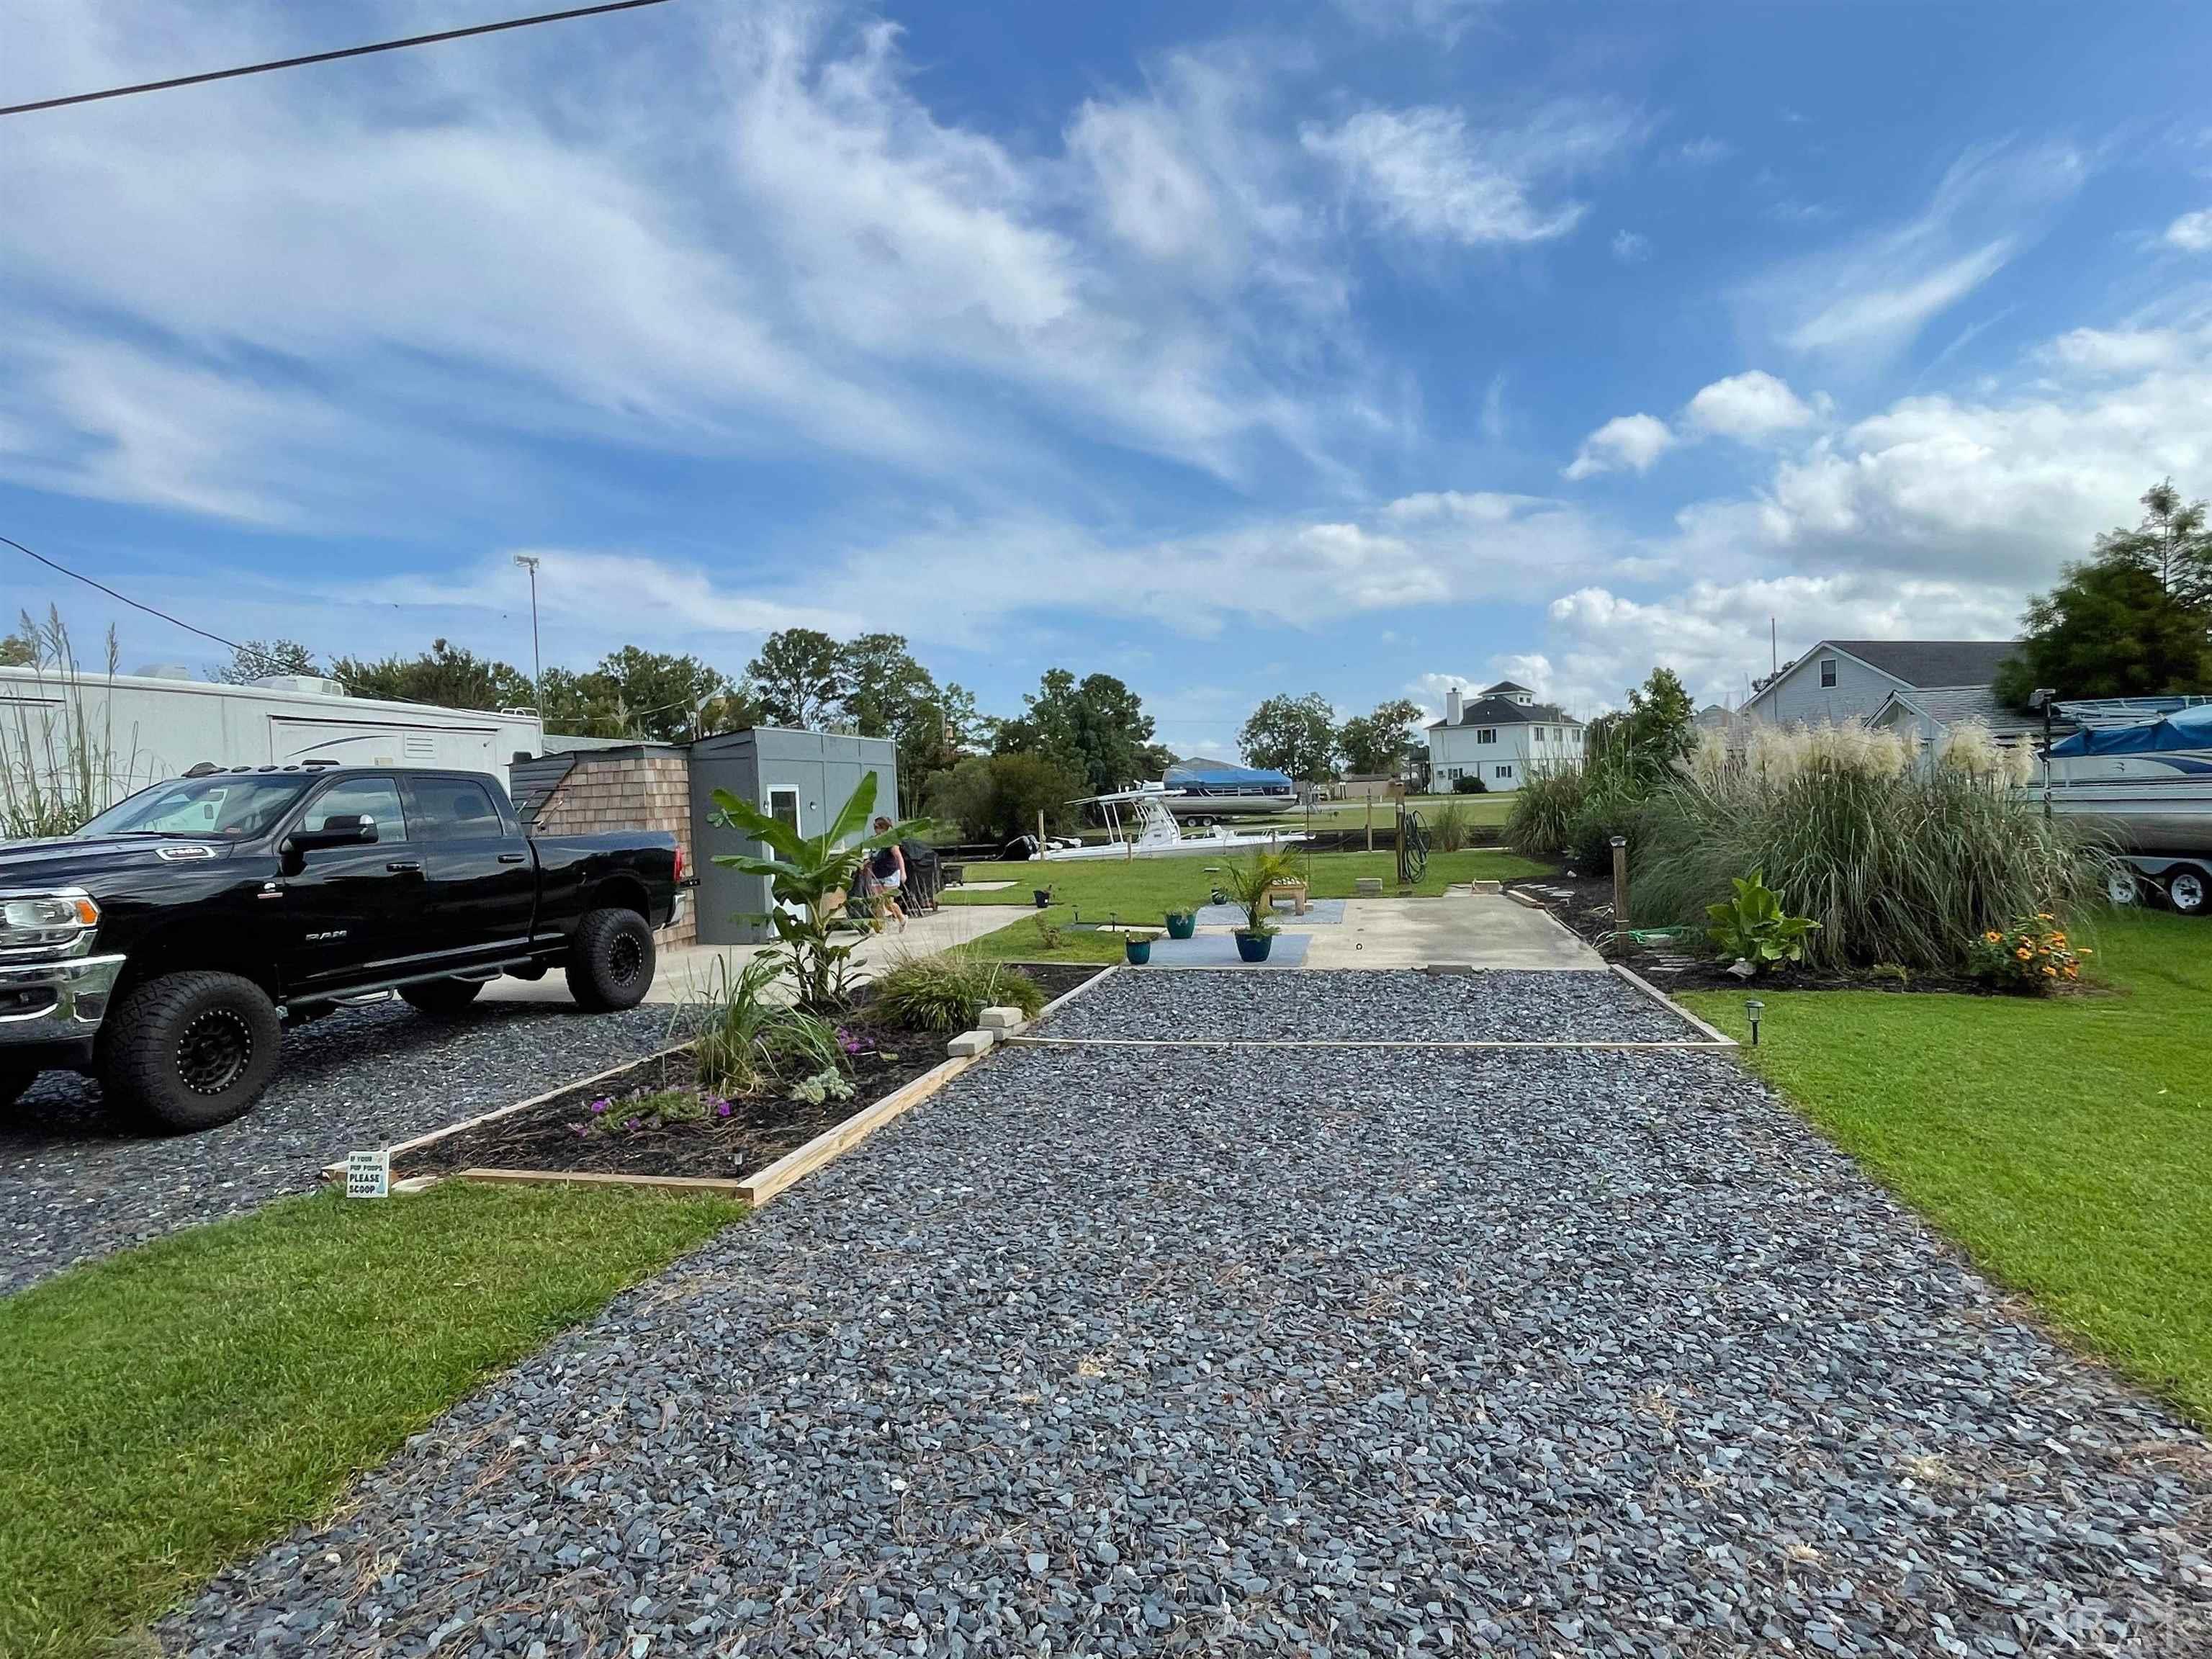 Two waterfront lots with direct access to the sound. 60' of water frontage on a wide canal.  Only 15 minutes to the beach and approximately 40 minutes to the Virginia Line.  Municipal water and sewer are in place.